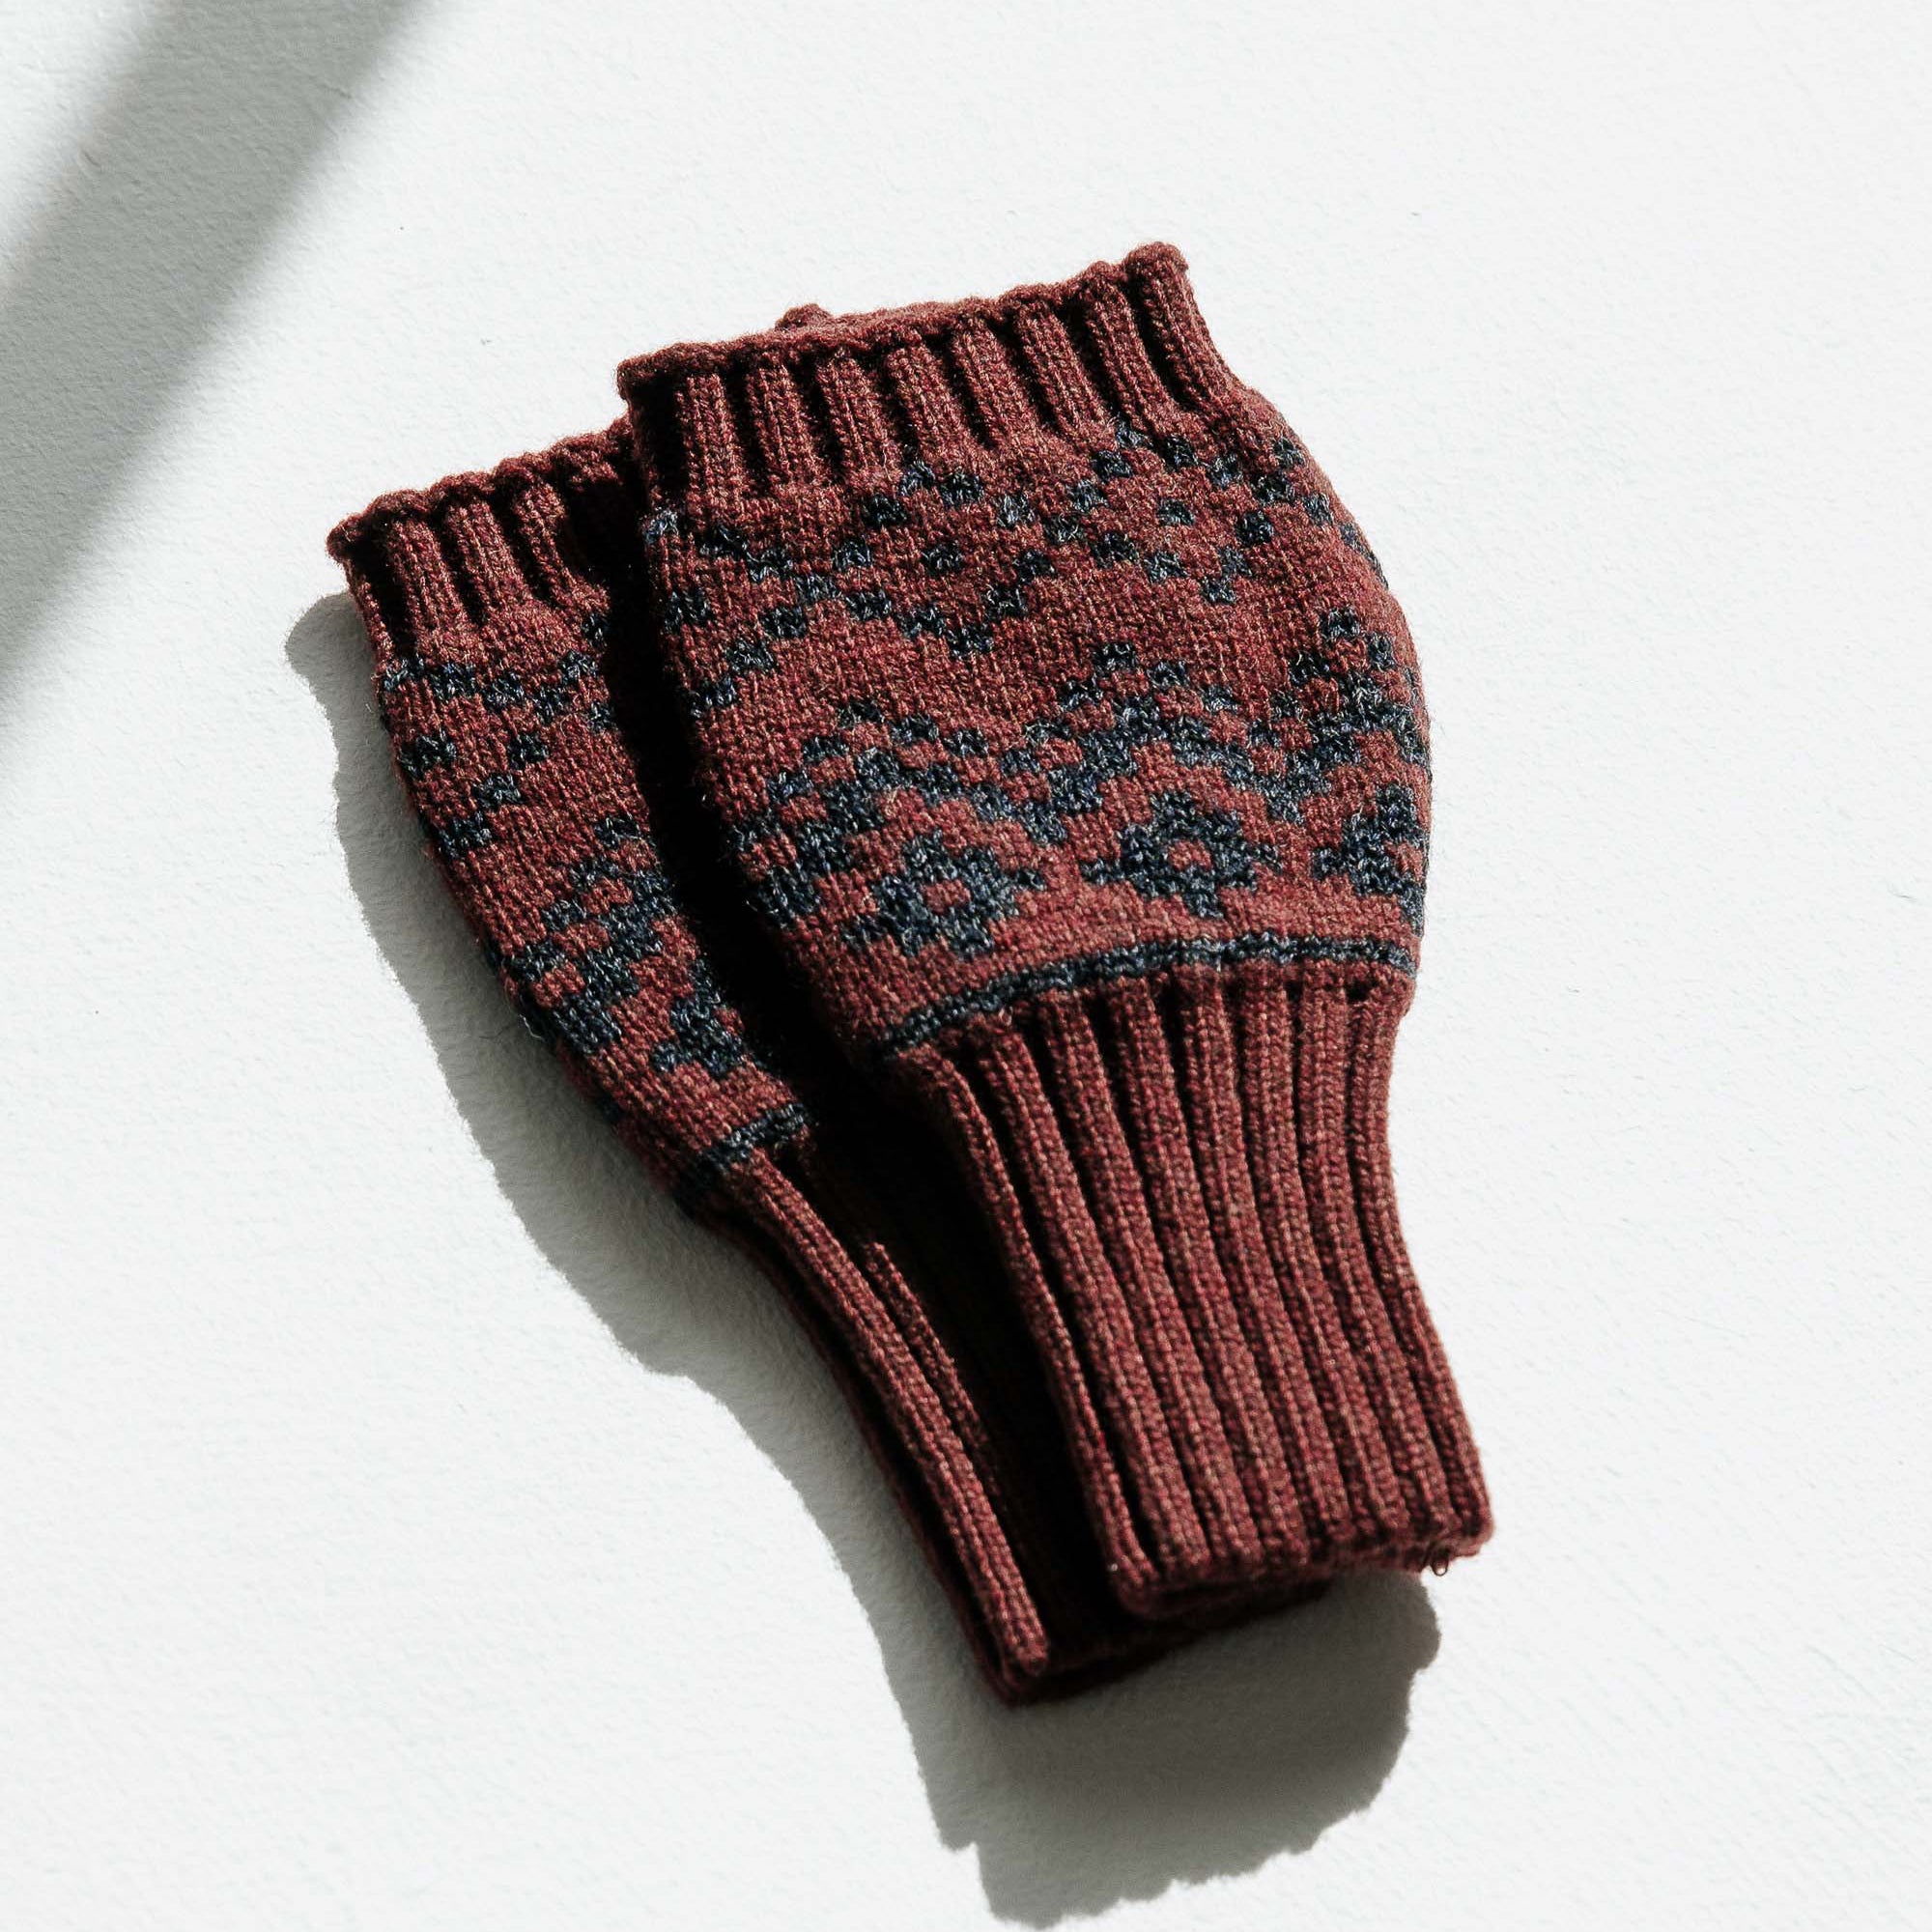 LYØ Knitted Hand Warmers in Burgundy